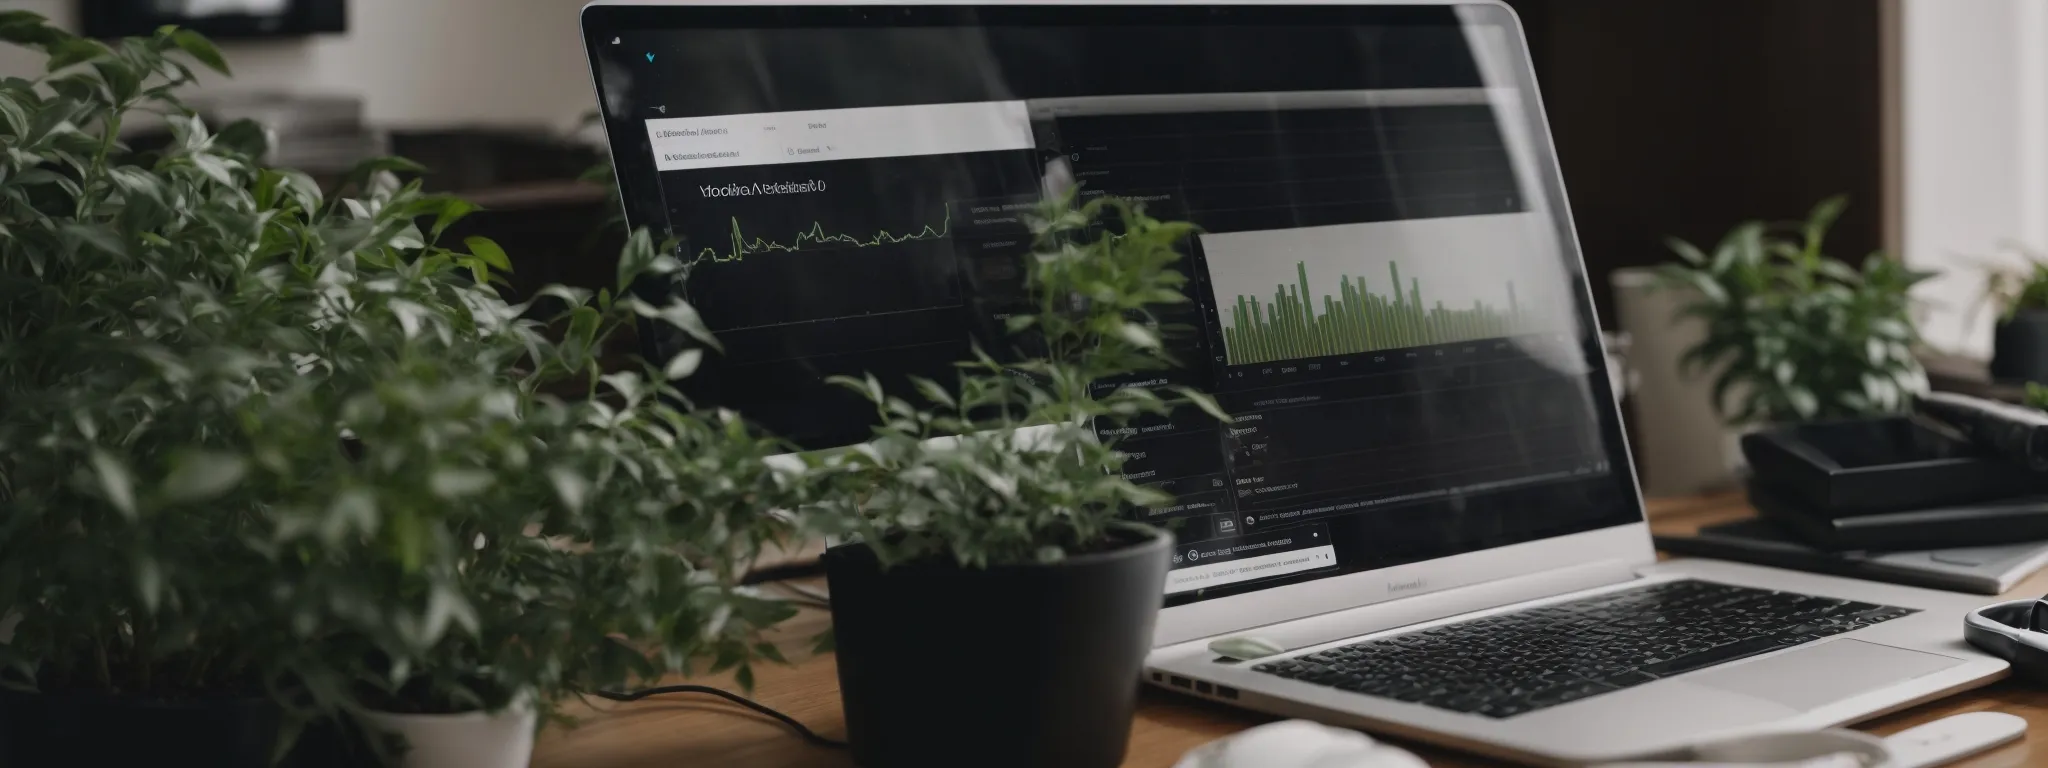 a laptop with analytics graphs on the screen next to a magnifying glass and a plant on a desk.